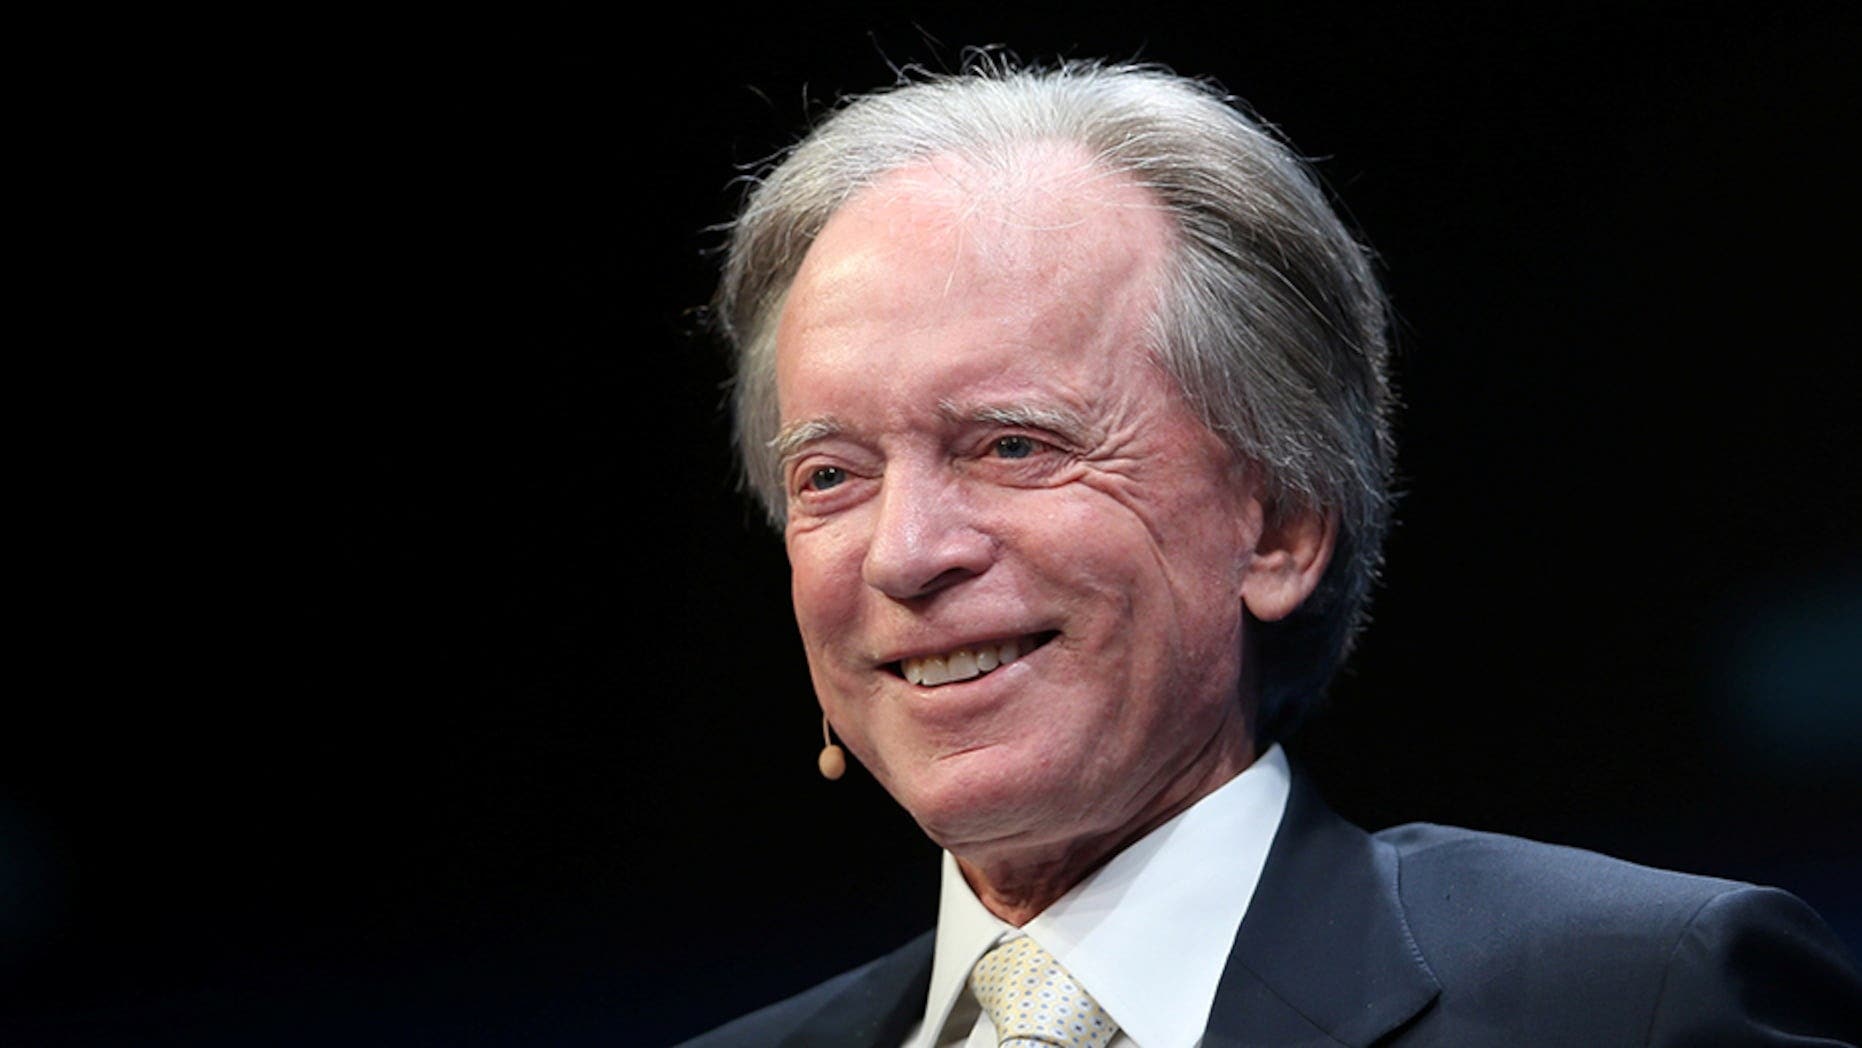 The explosion of Bond King Bill Gross’s ‘Gilligan’s Island’ theme song was harassment, the judge decides